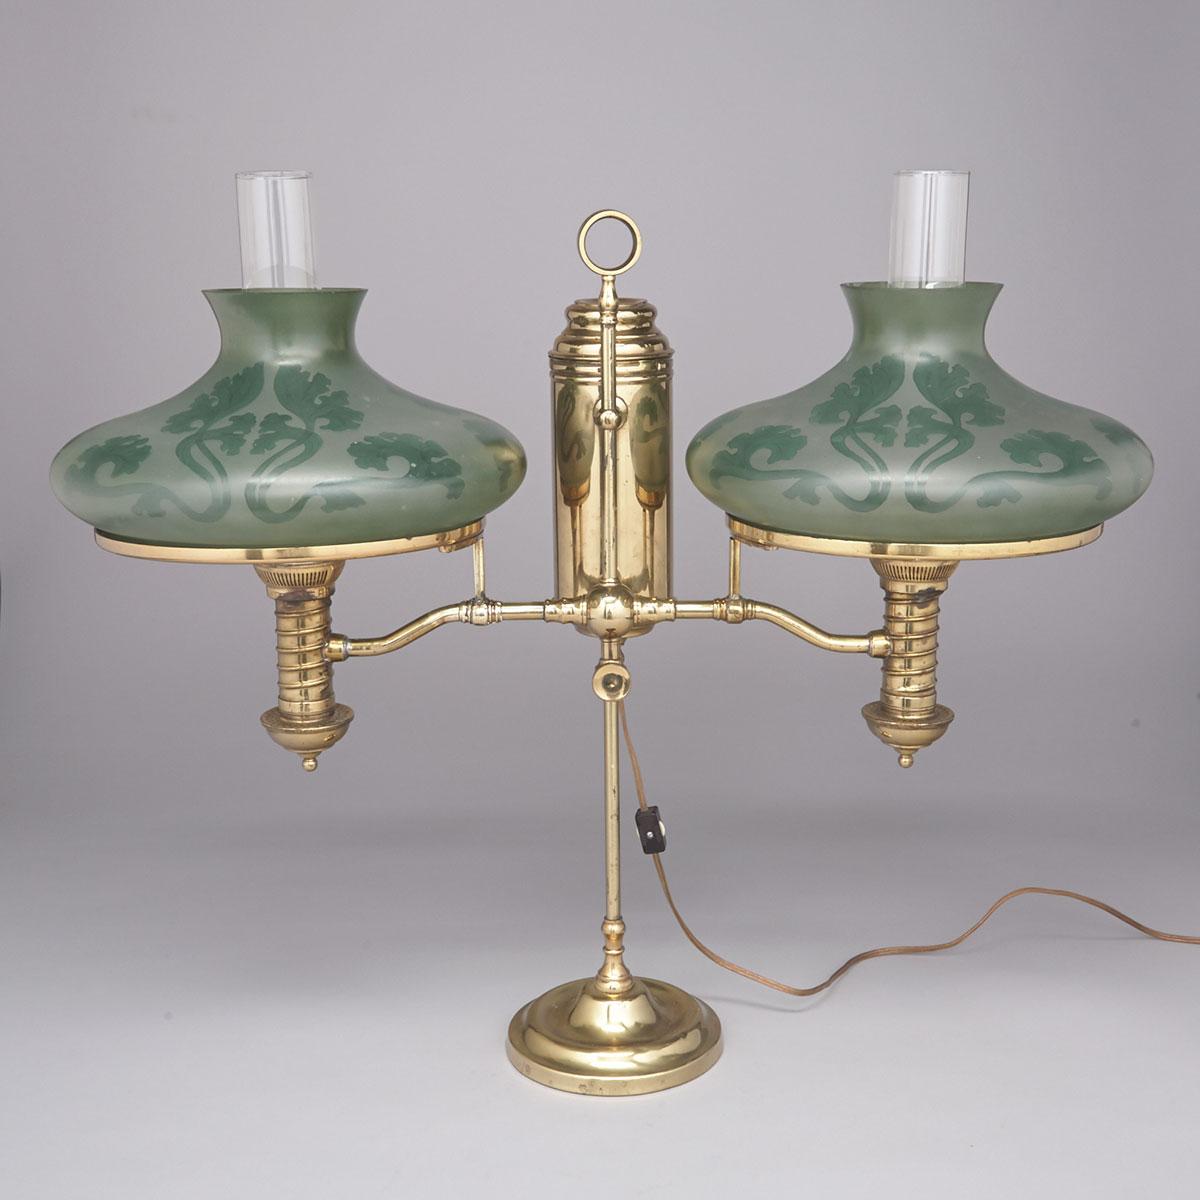 Handel Lacquered Brass and Glass Two Light Student Lamp, c.1910